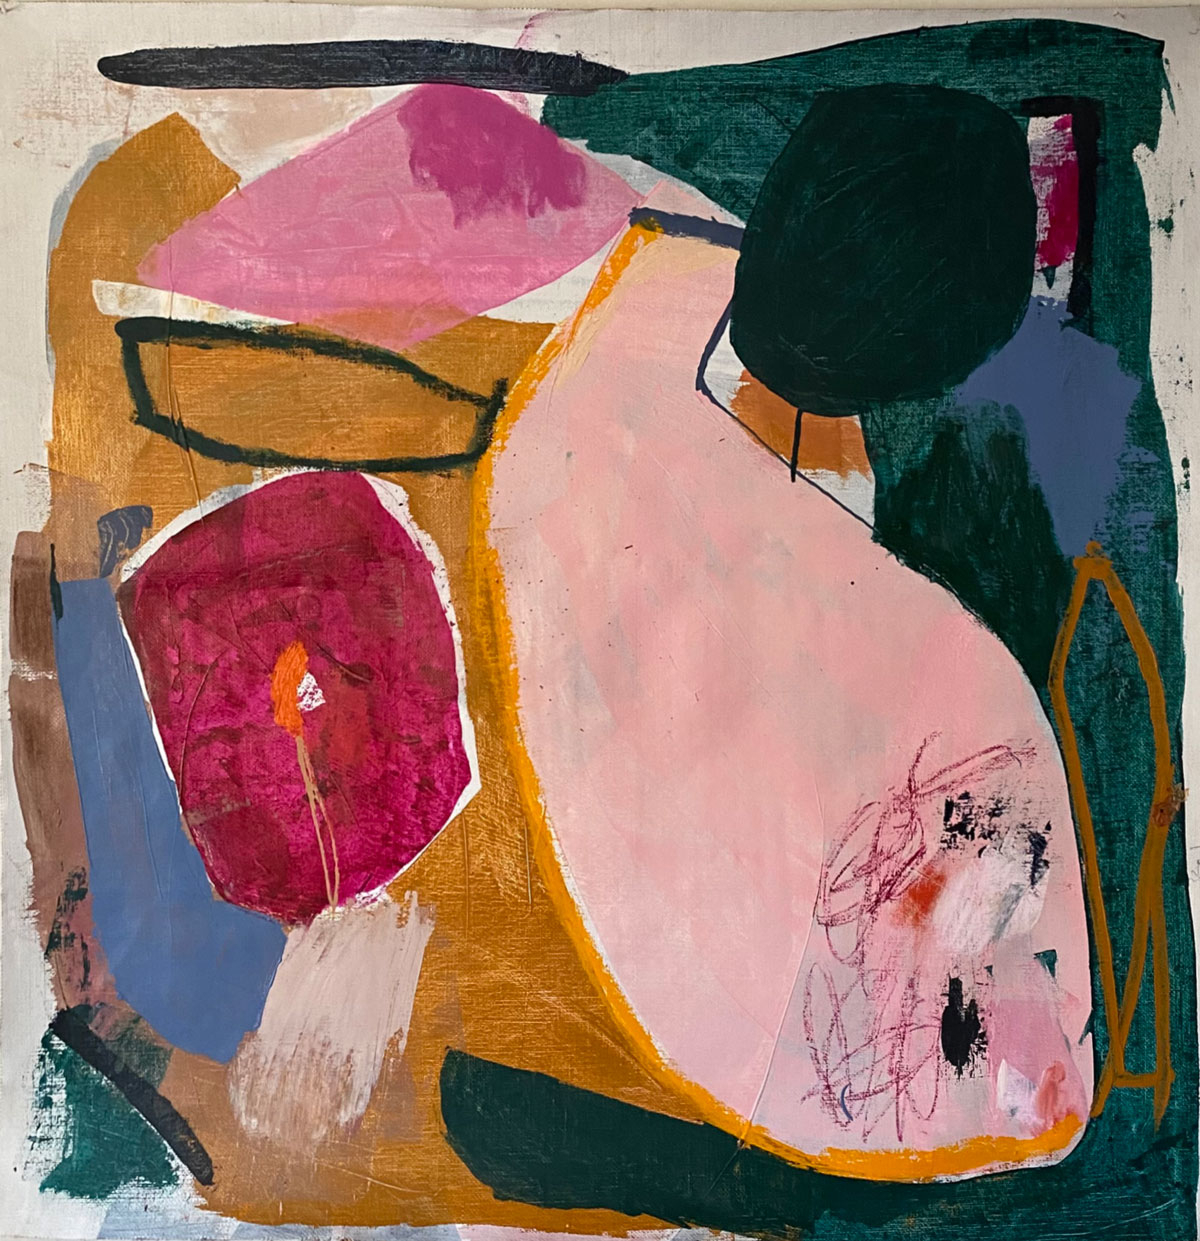 Painting of various shapes in a mix of colors from pink to blue and dark yellow